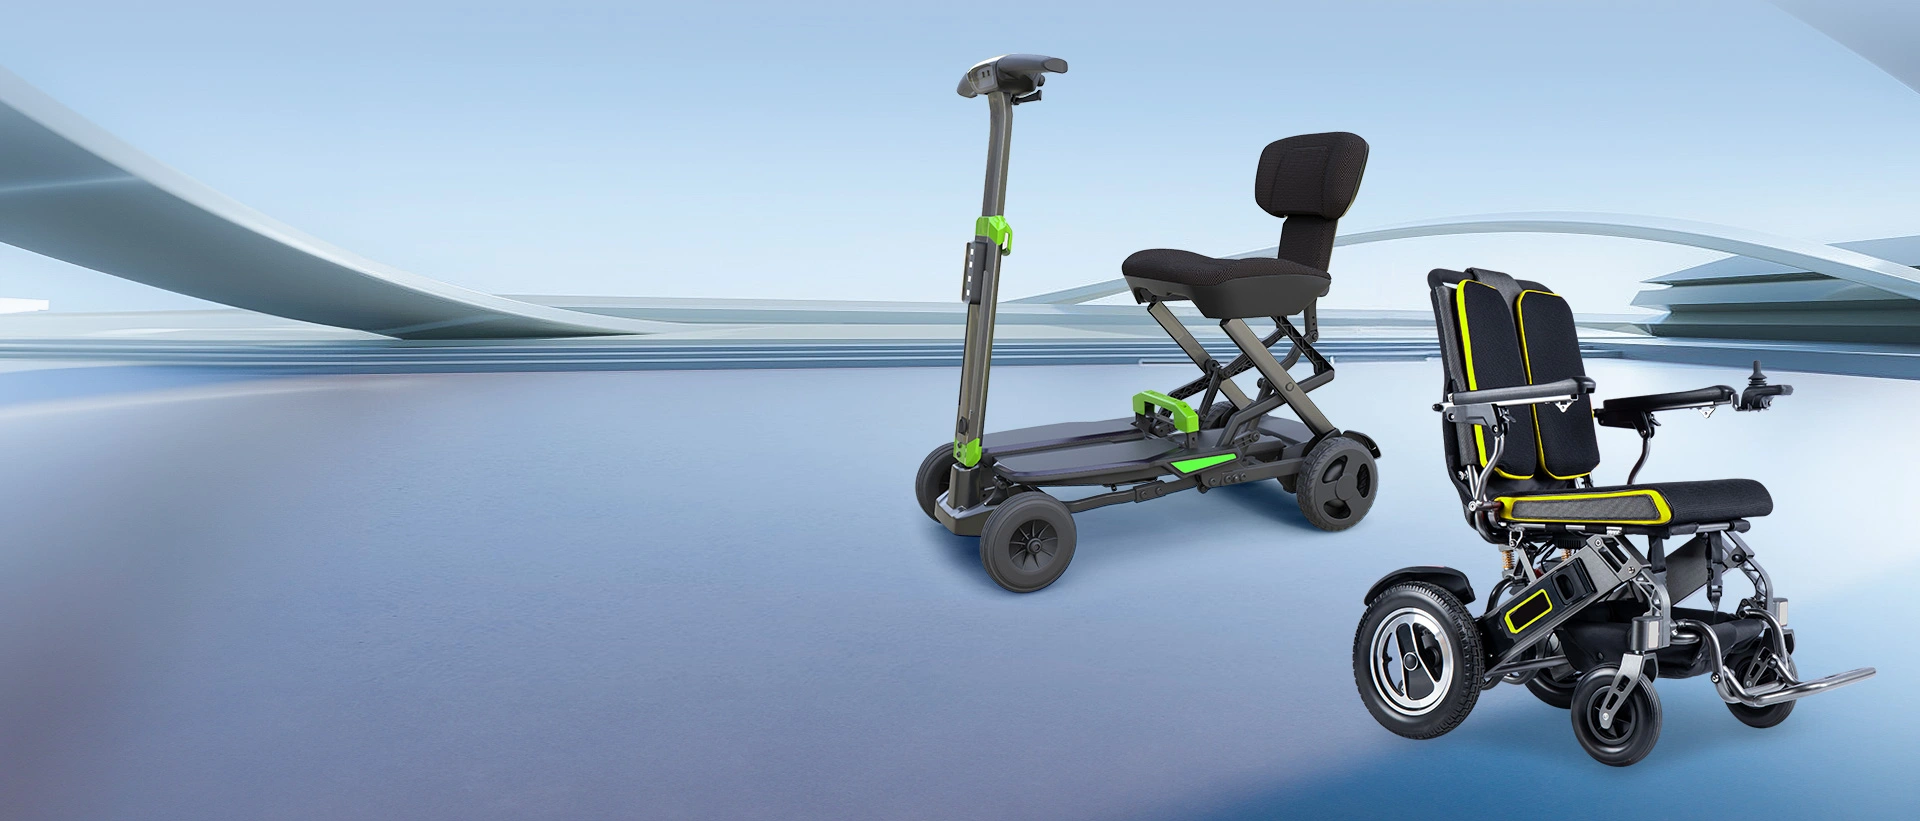 YATTLL Wheelchairs and Mobility Scooters Meet Your Needs